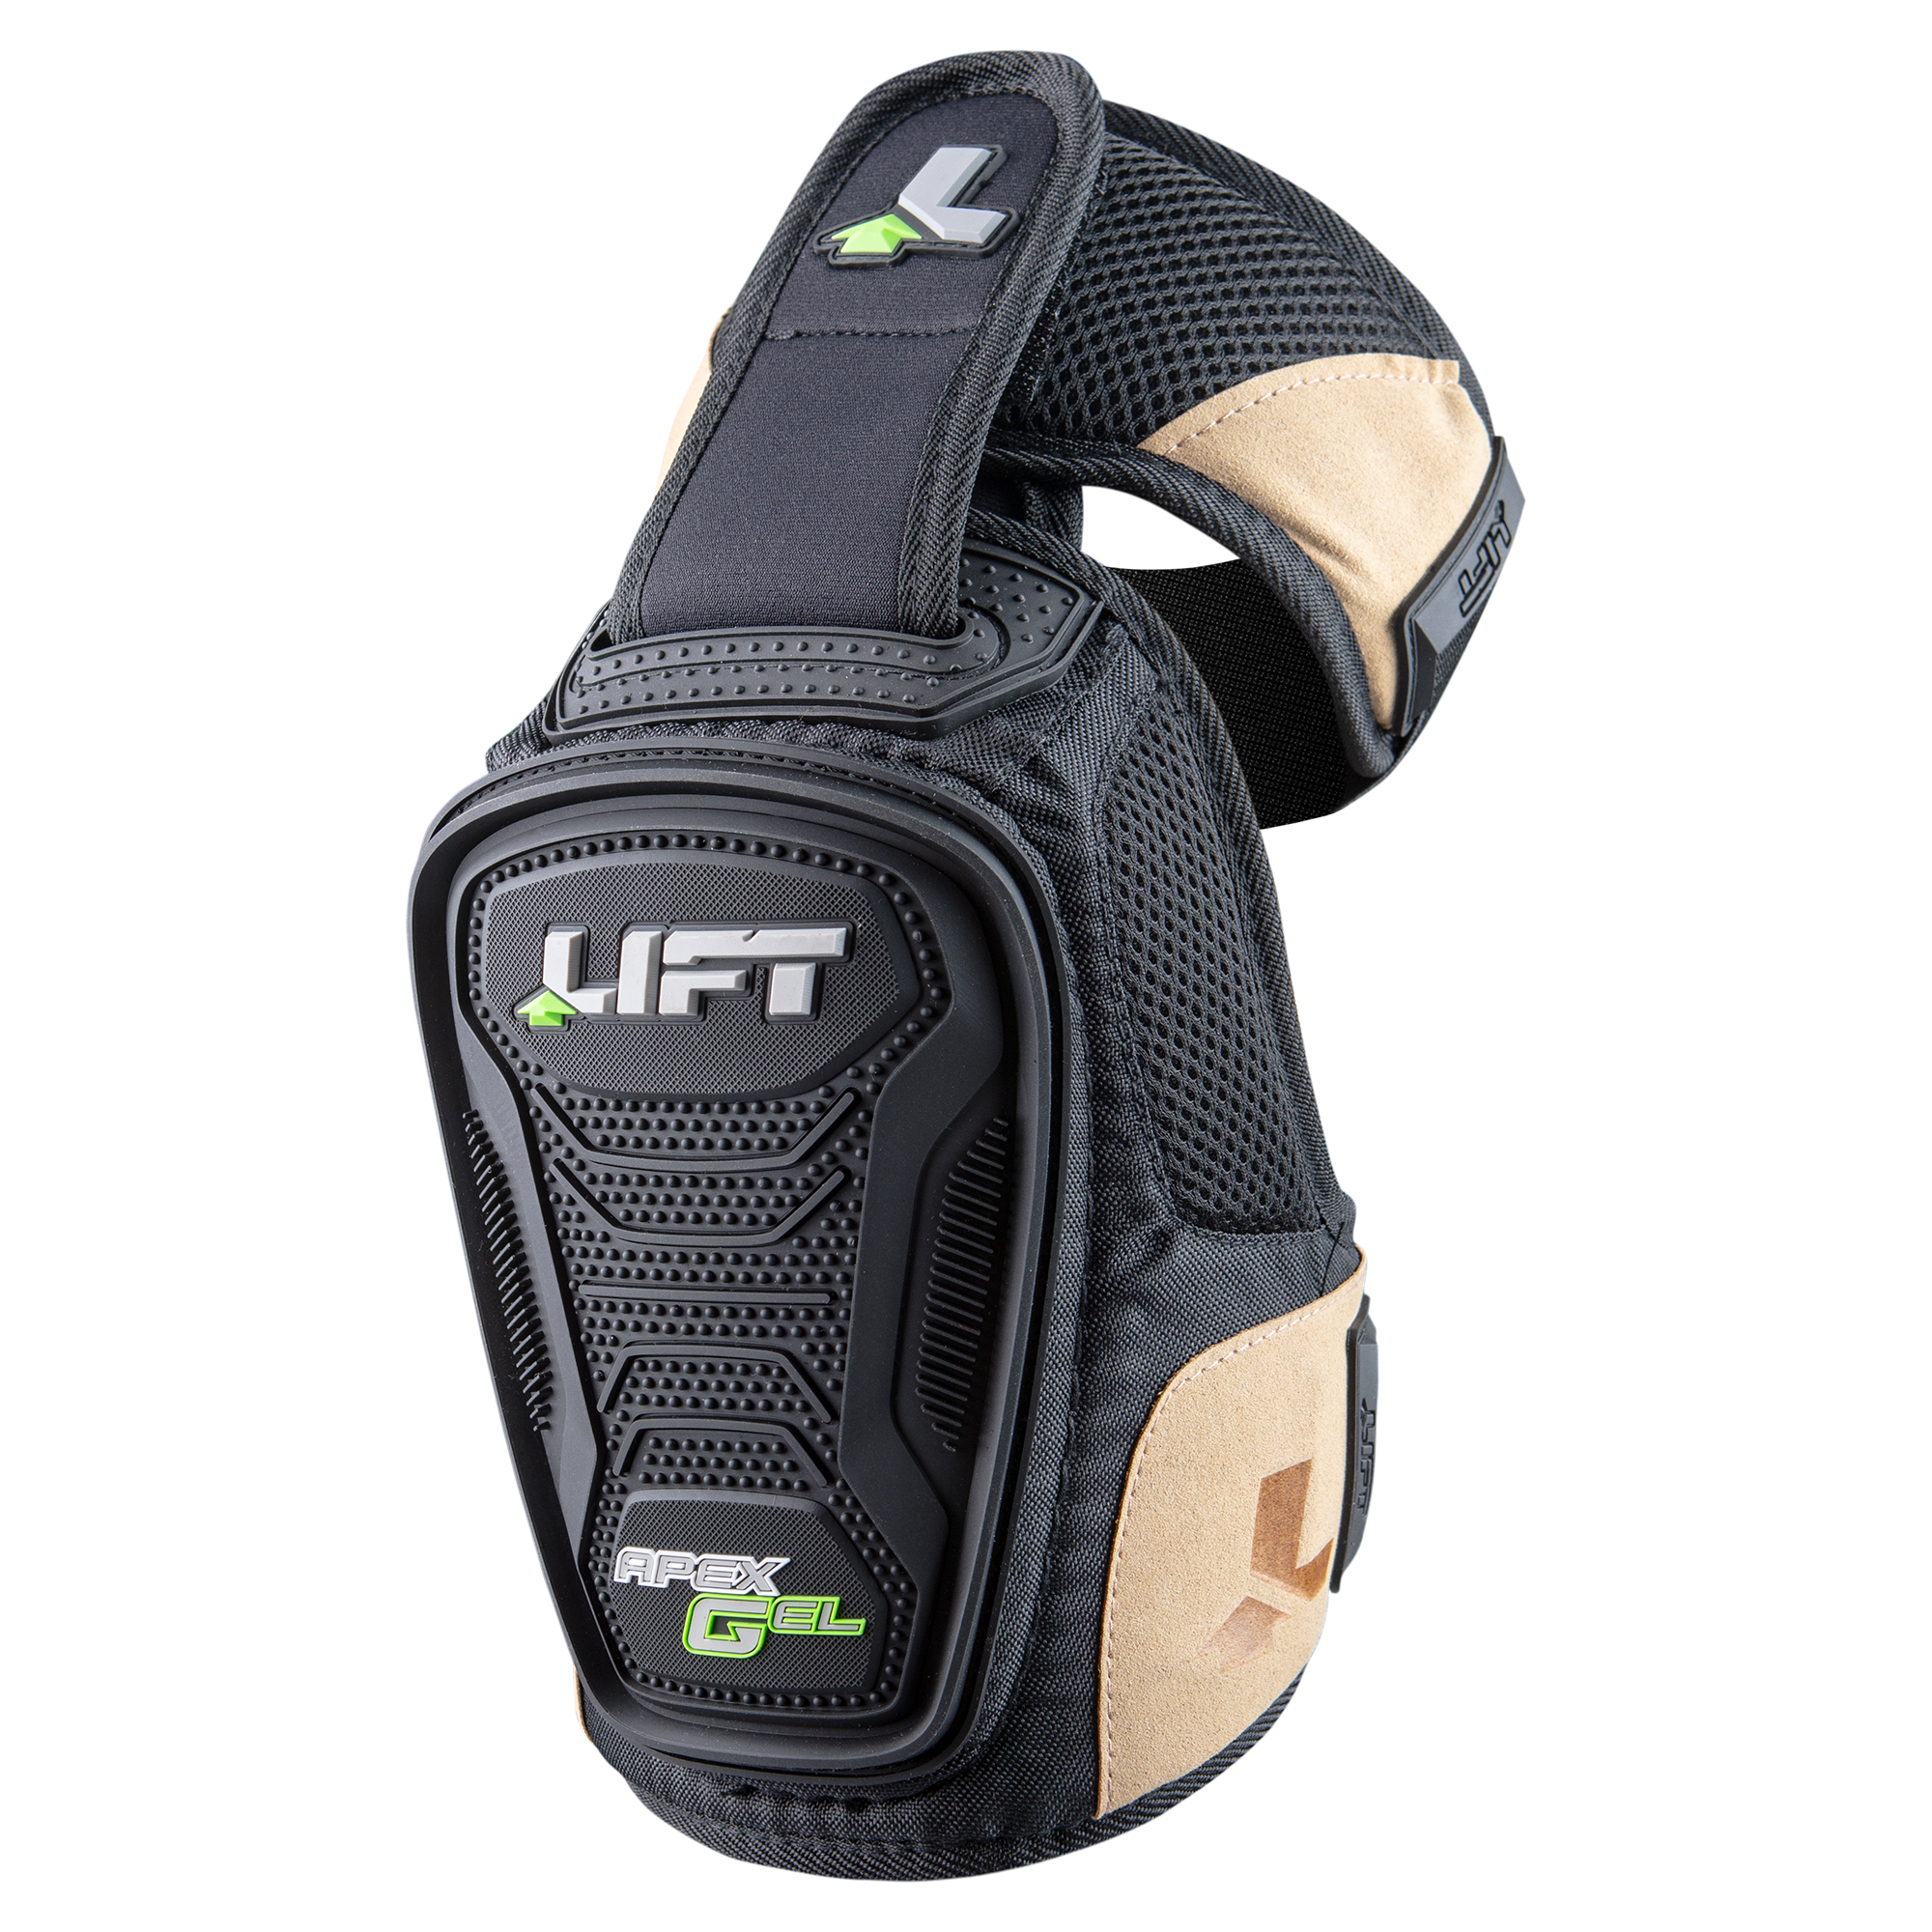 LIFT Safety, APEX GEL Knee Guard, Included (qty.) 2, Color Black, Model KAX-0K